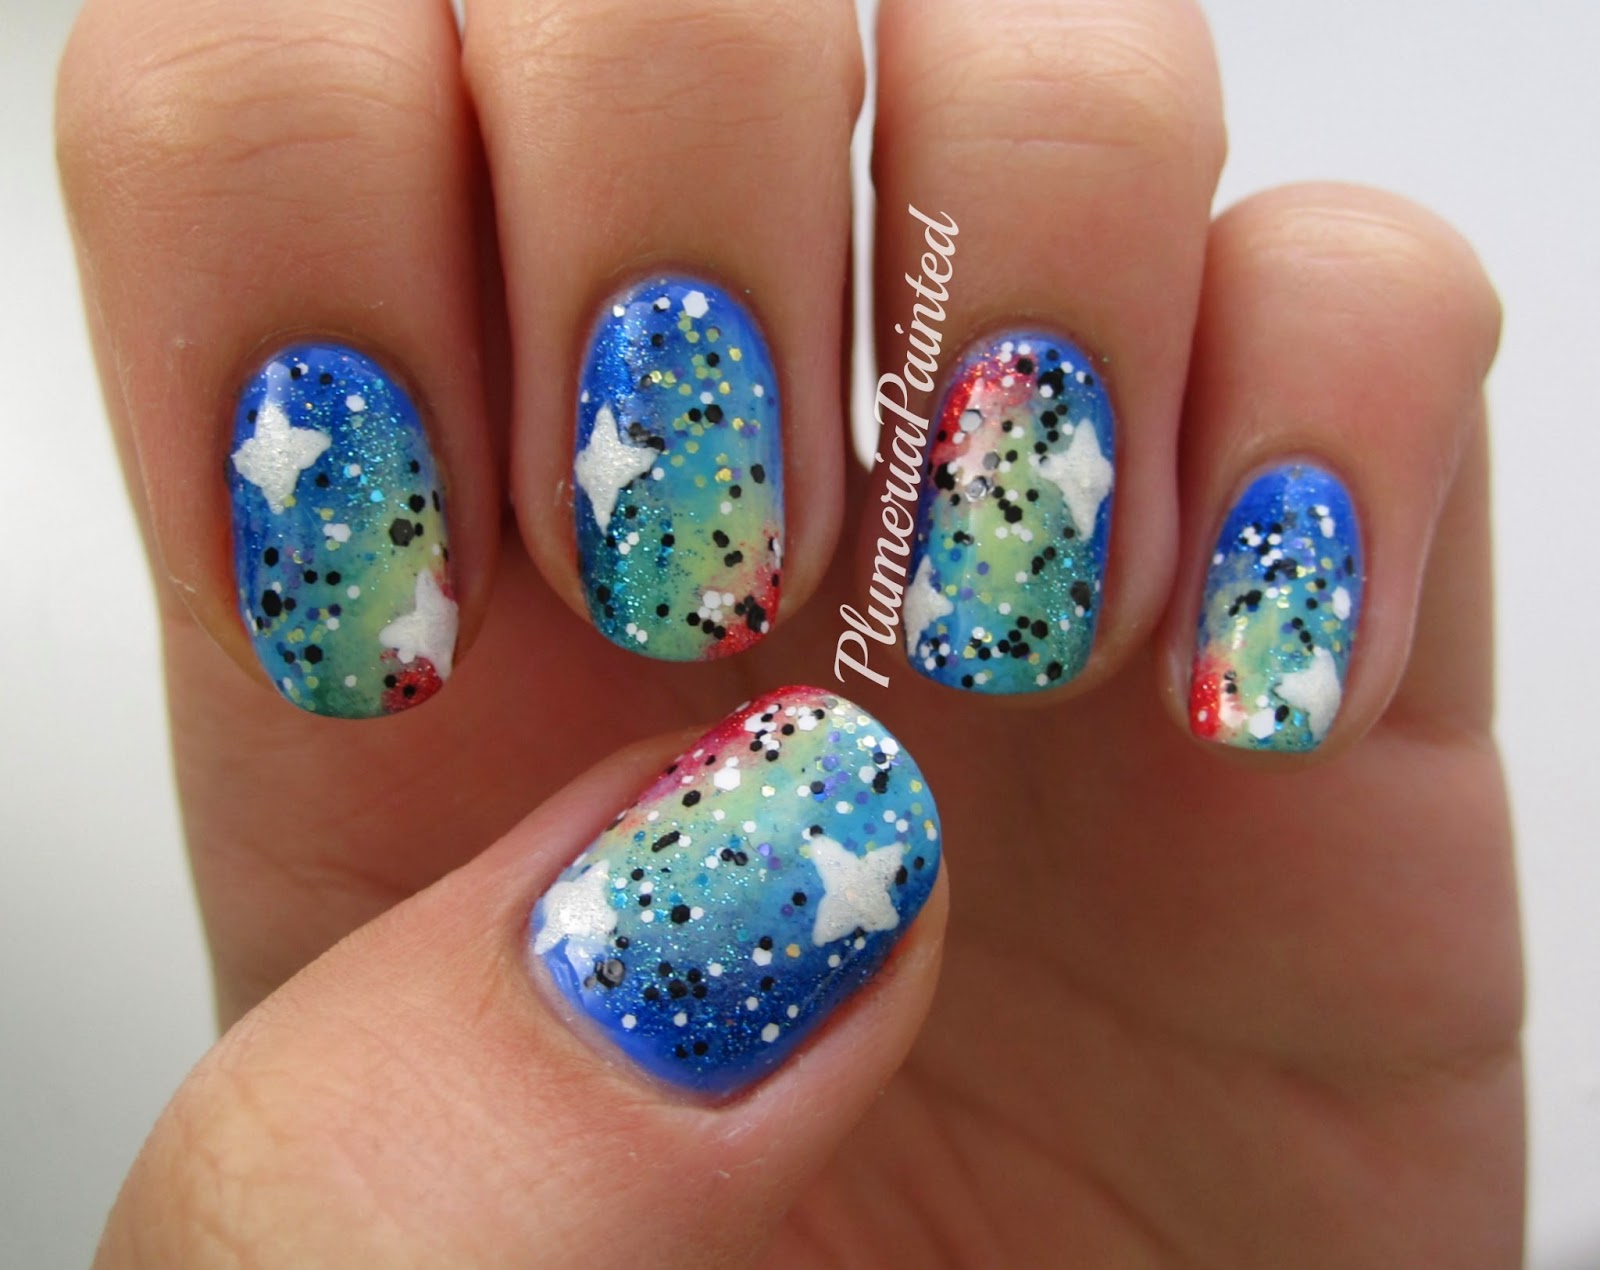 PlumeriaPainted: Primary Galaxy Nails